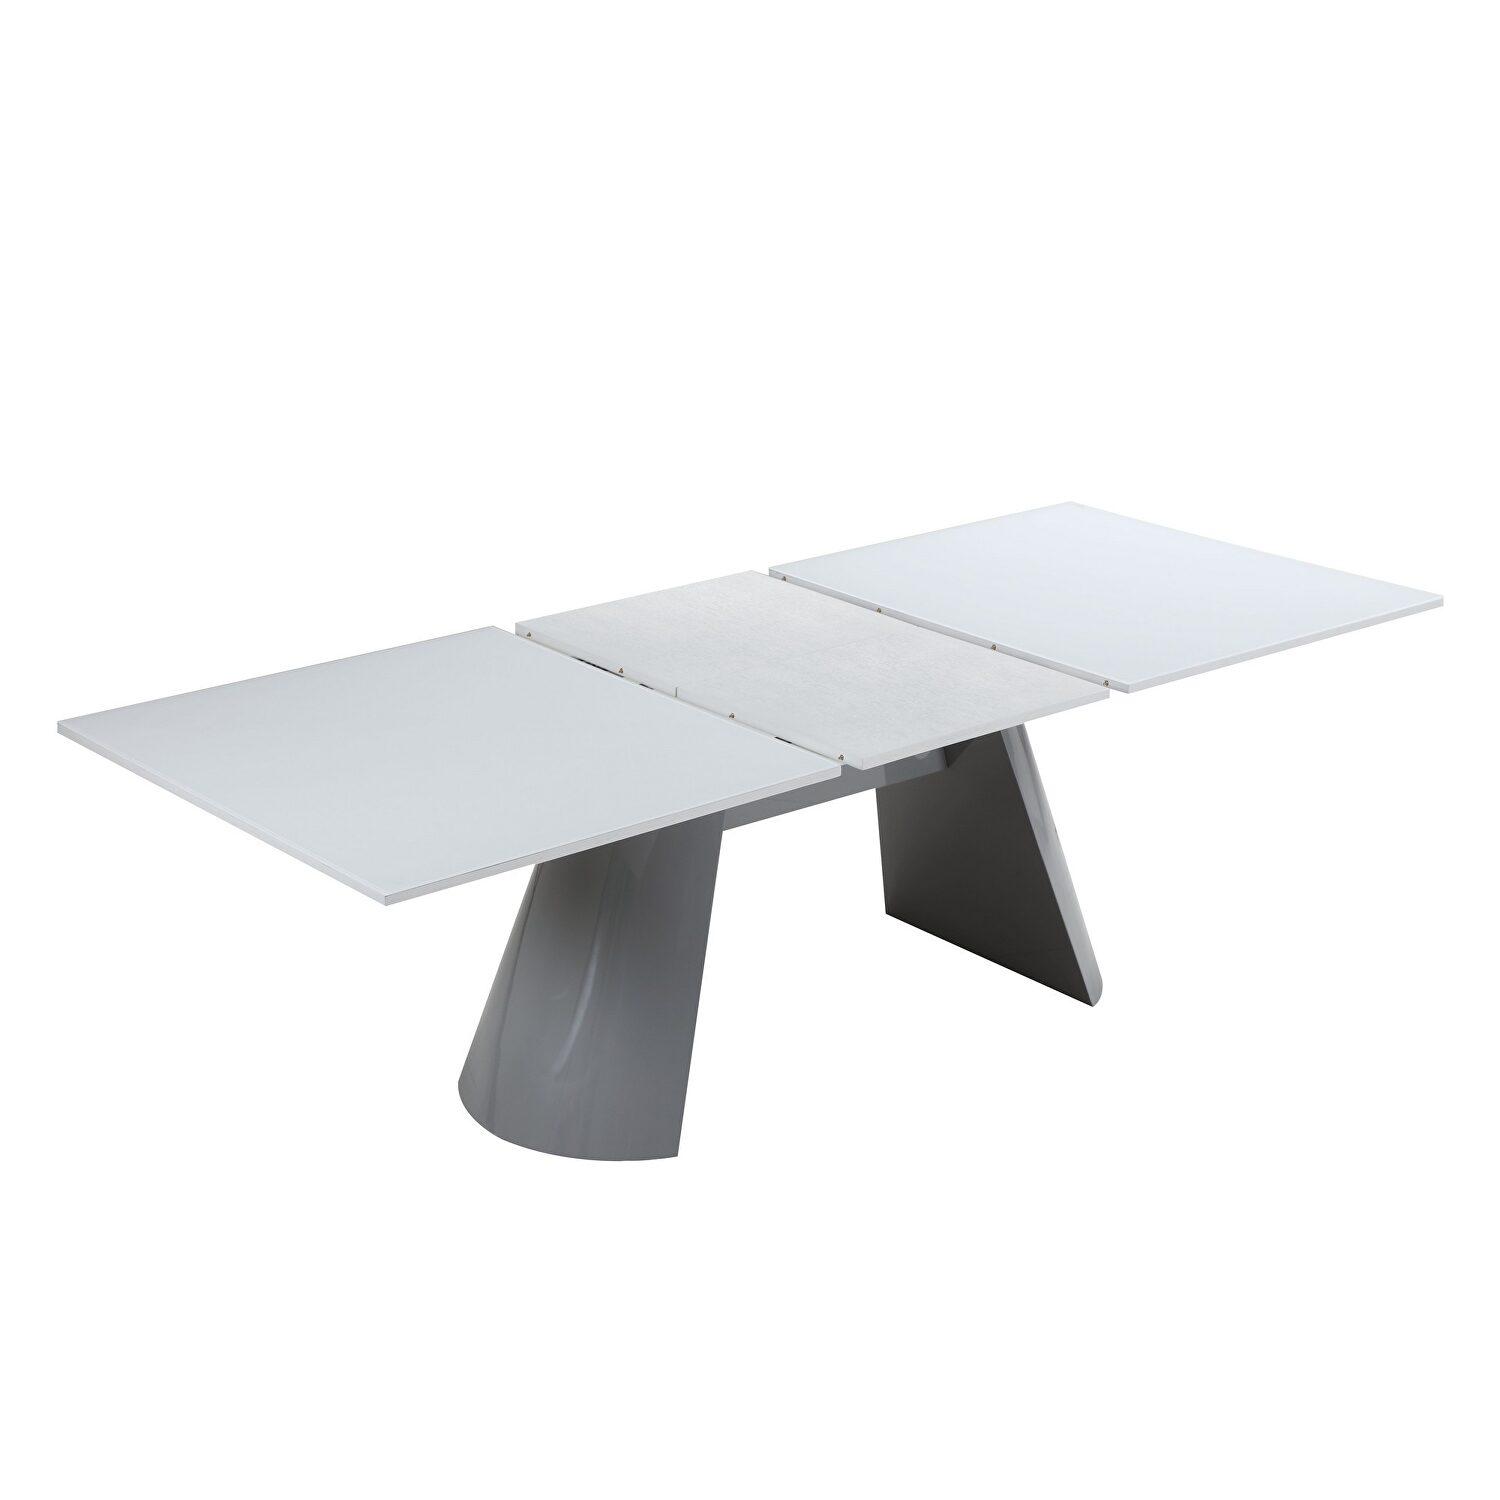 

    
Global Furniture USA BEVERLY HILLS Dining Table Set Light Gray/White/Gray BEVERLY HILLS DT + D9048DC-Set-5
